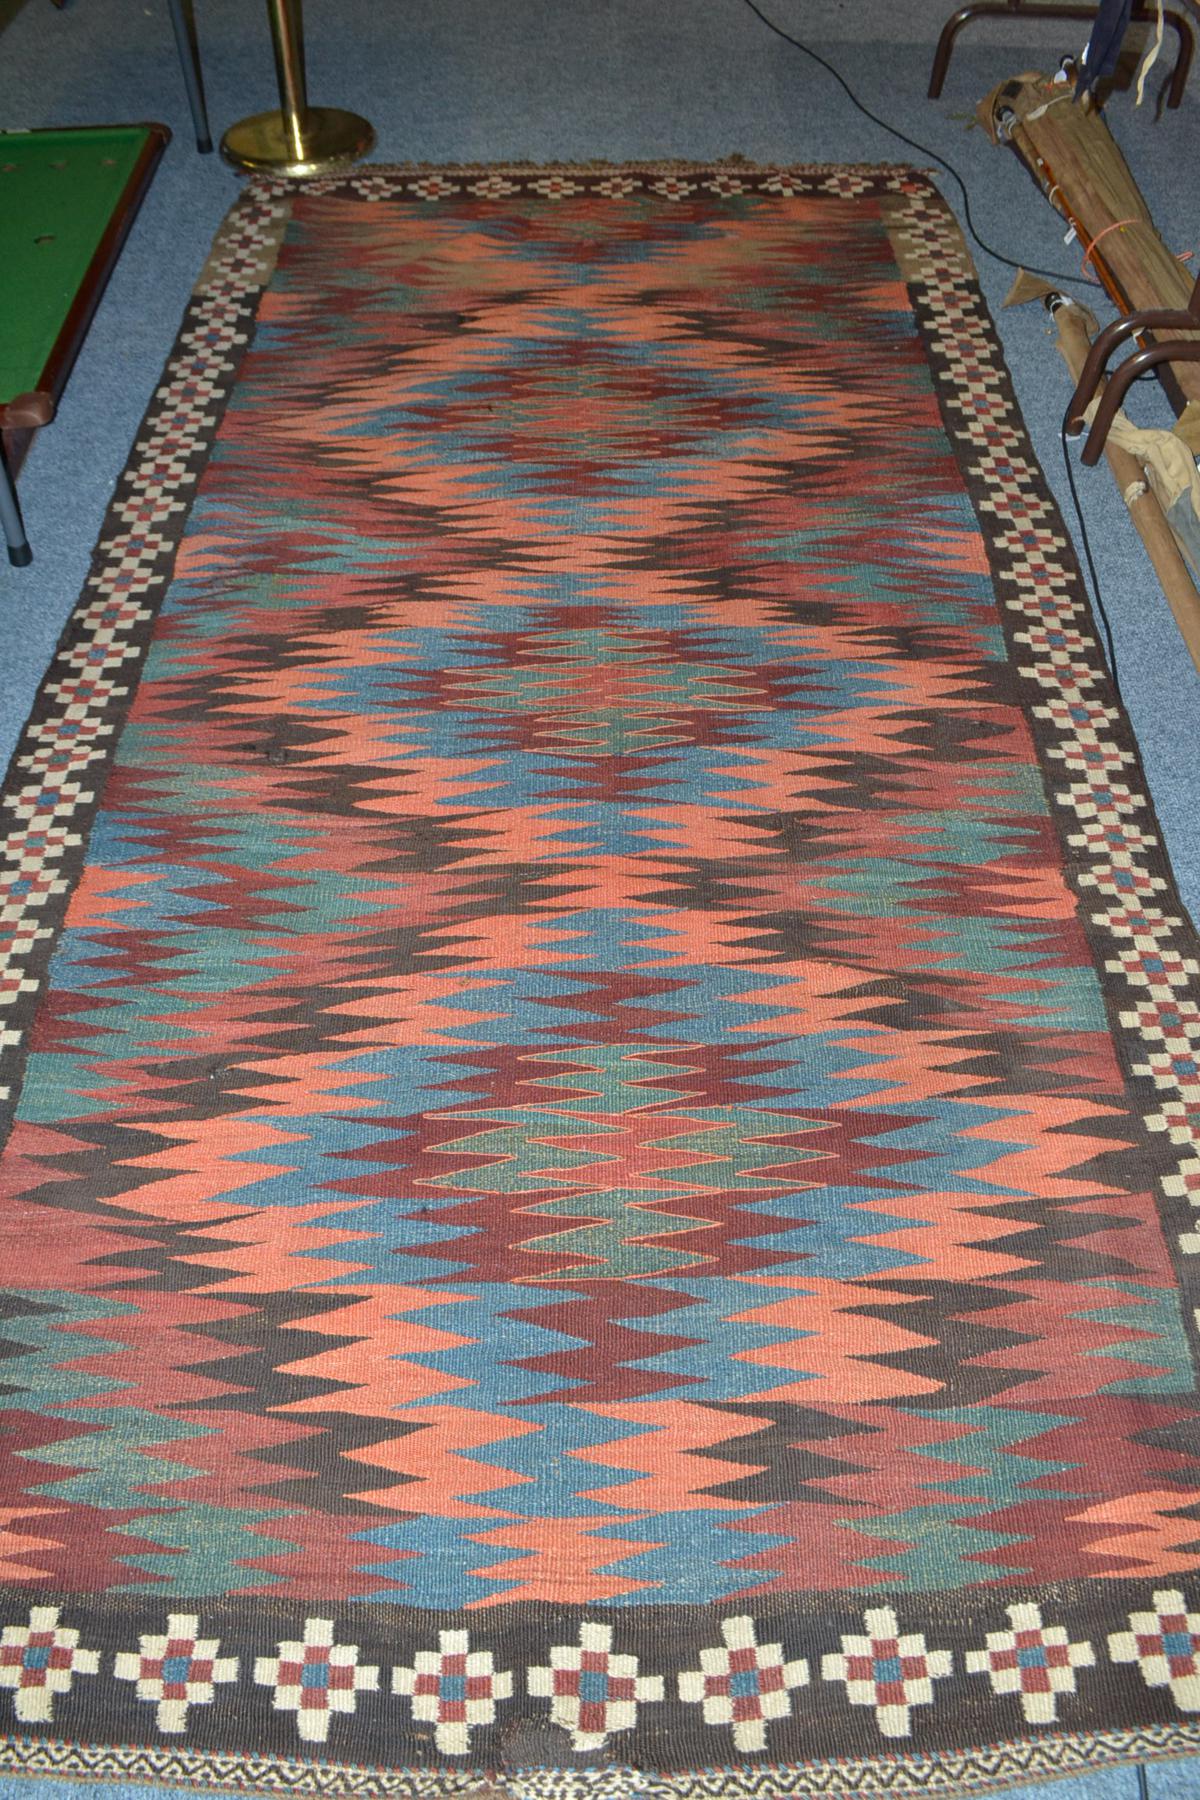 Veramin kilim, Central Persia, the field of interlinking polychrome serrated medallions enclosed